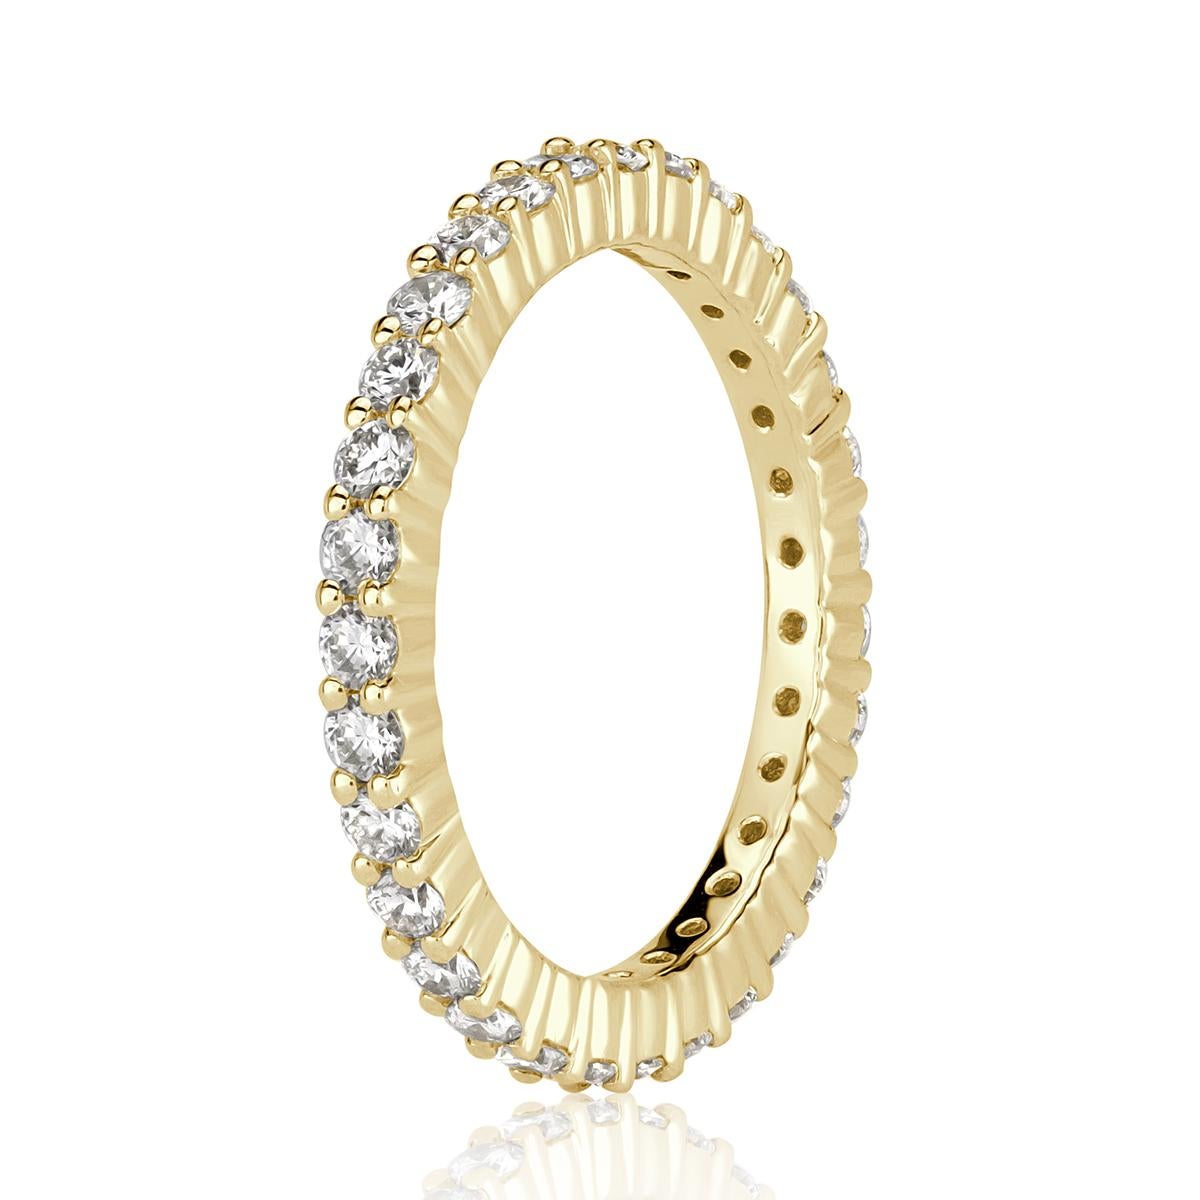 Exquisitely handcrafted in our custom 18k yellow gold, this lovely diamond eternity band features 1.00ct of seamlessly matched round brilliant cut diamonds graded at premium qualities of E-F in color, VS1-VS2 in clarity. All eternity bands are shown